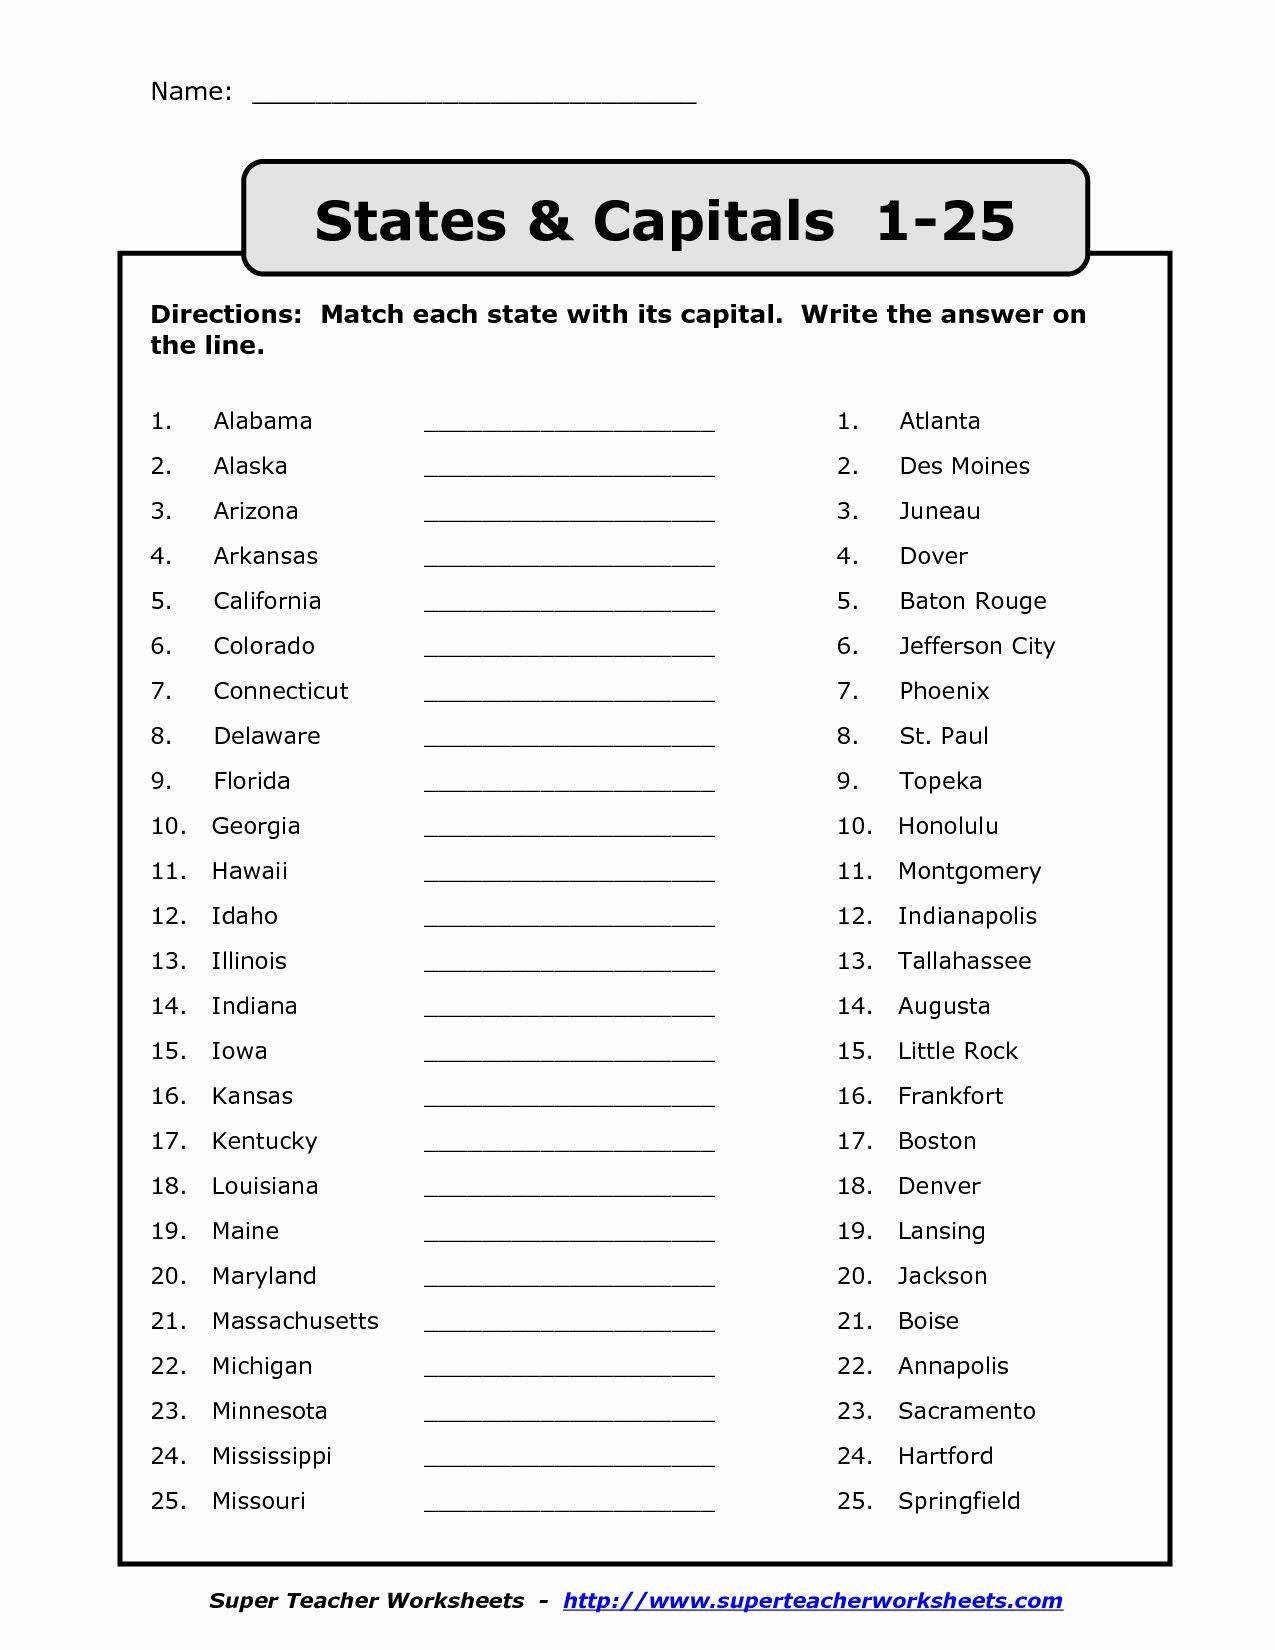 States and Capitals Matching Worksheet States and Capitals Matching Worksheet New Name States